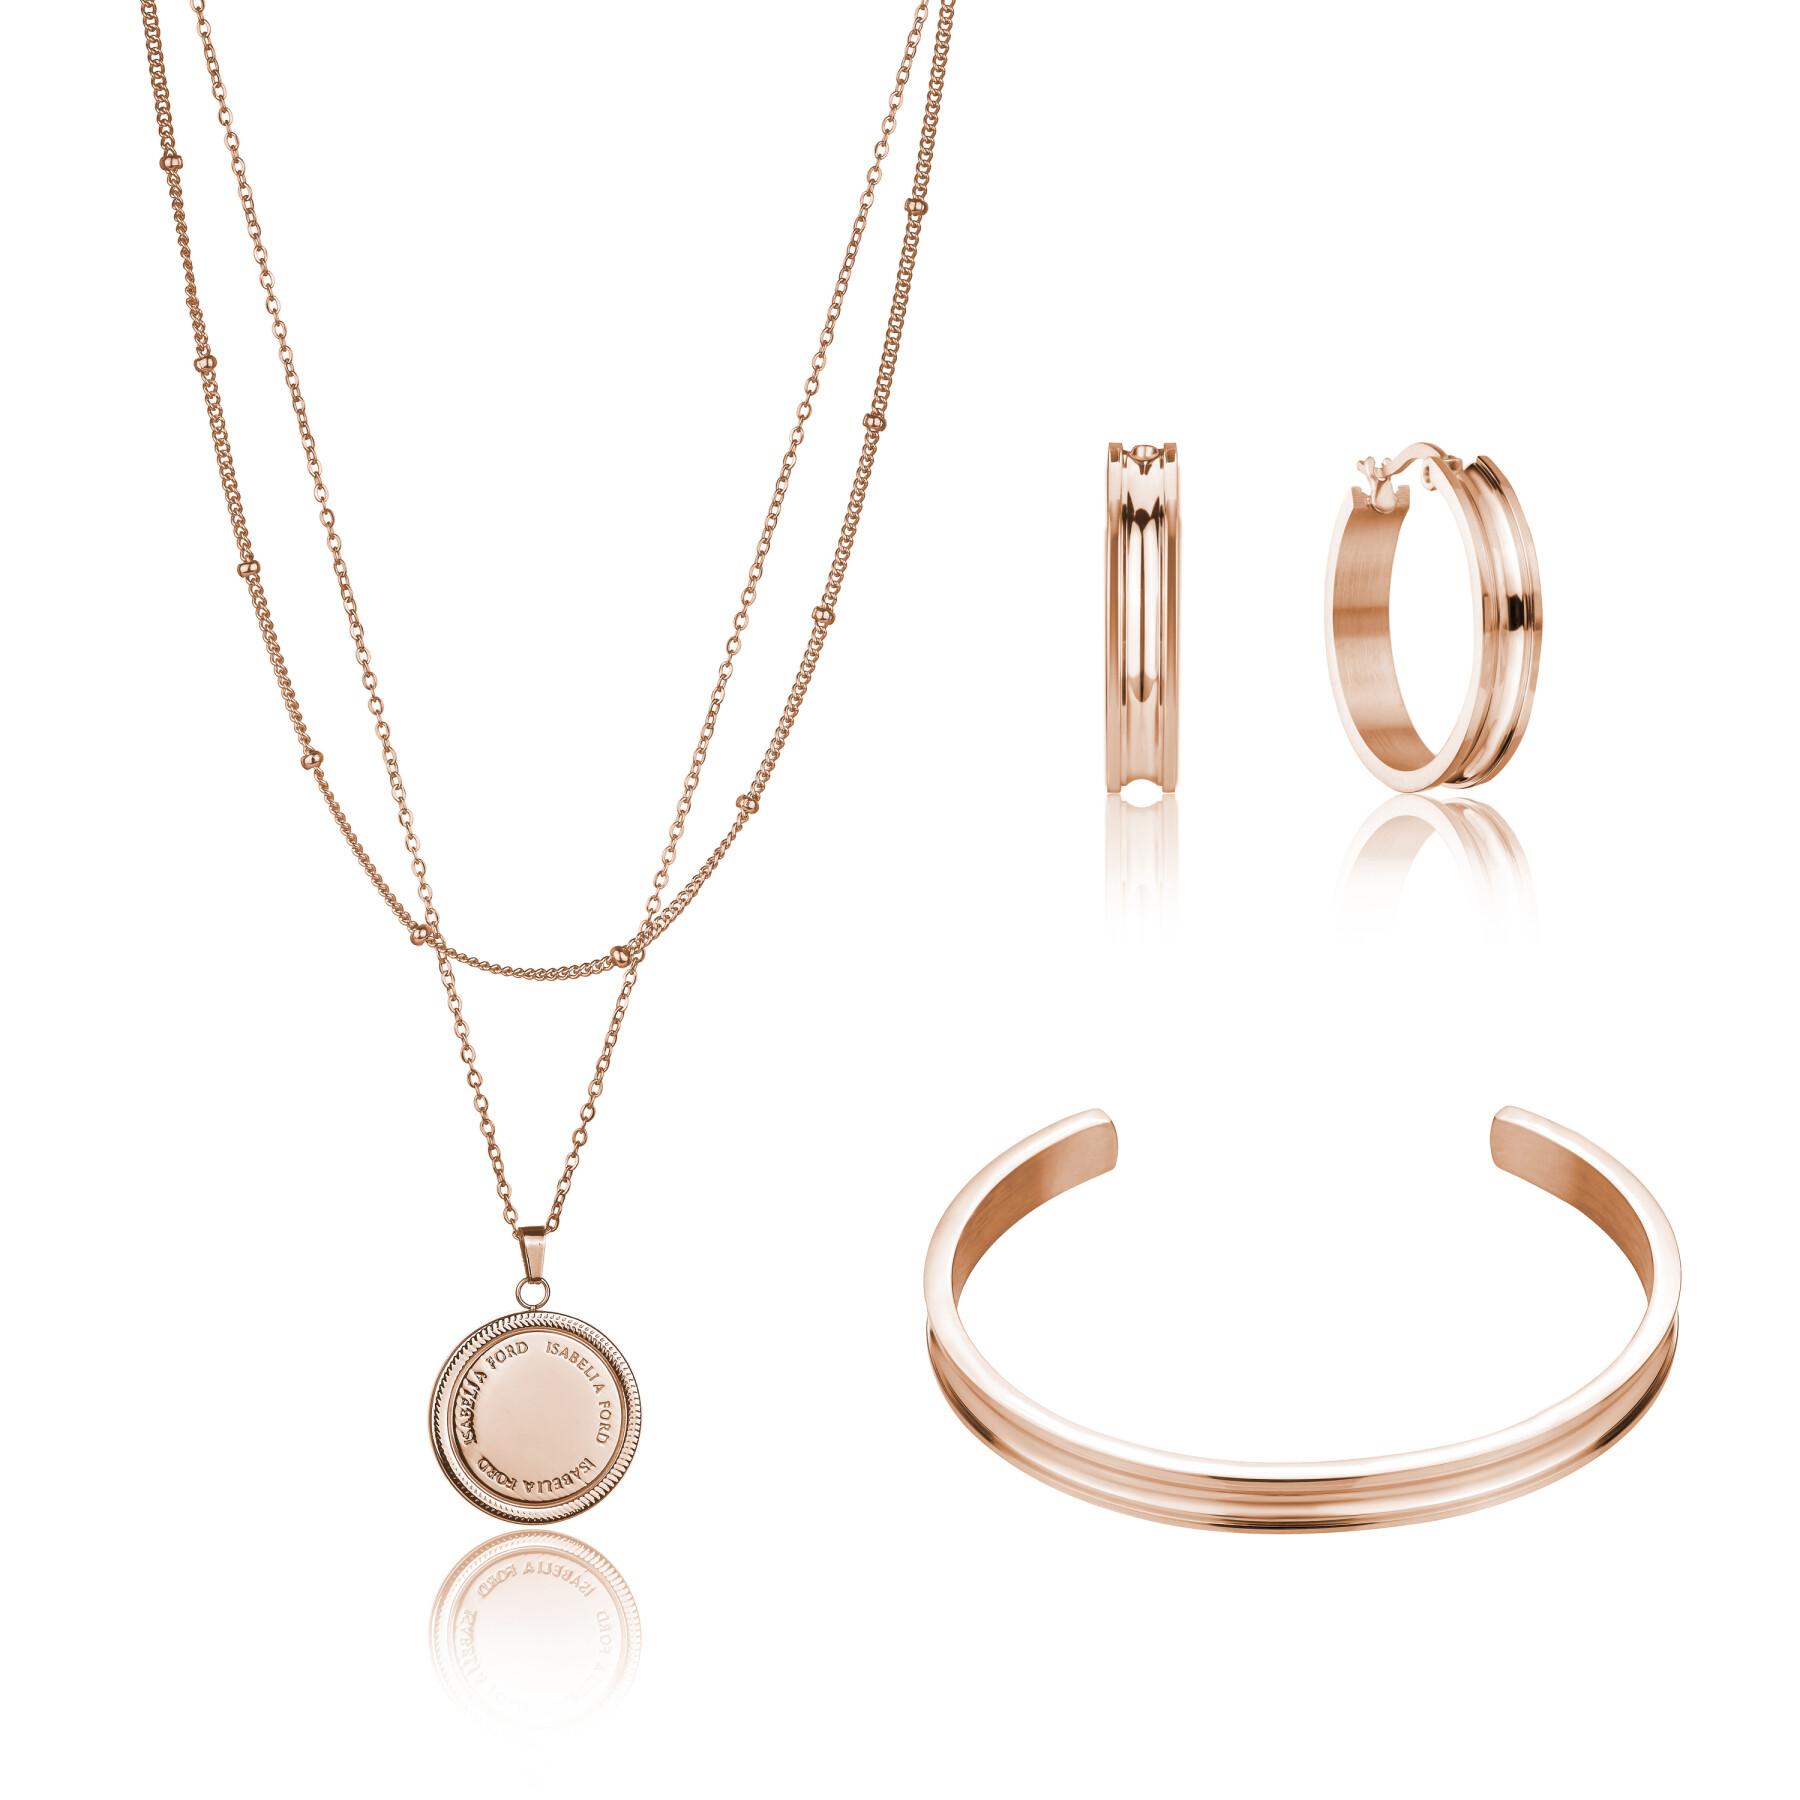 Necklace, bracelet and earrings set Isabella Ford Livia